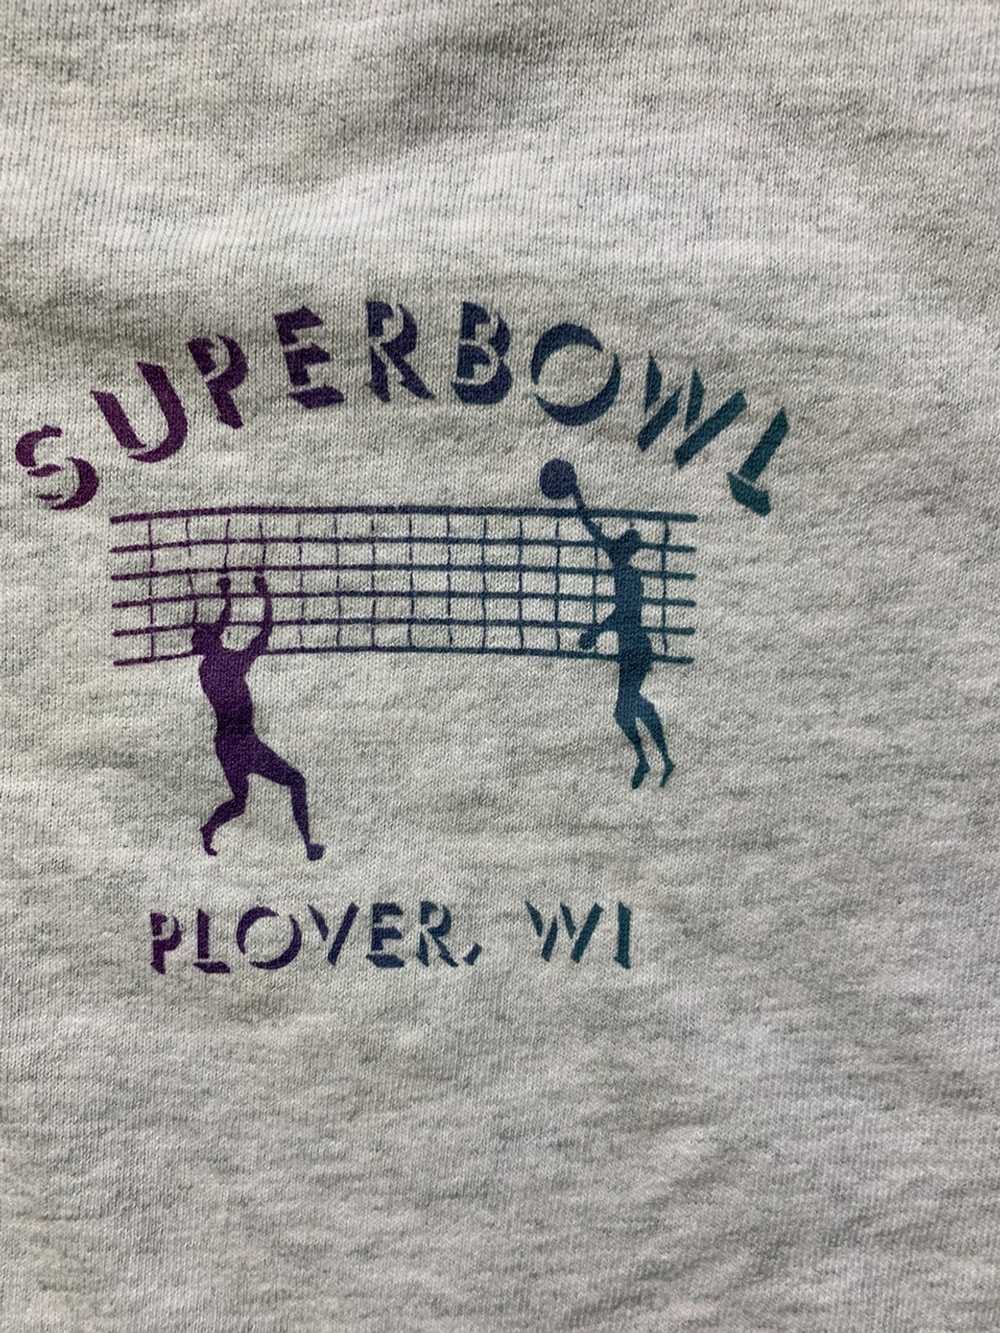 American College × Vintage VTG T-Shirt volleyball… - image 3